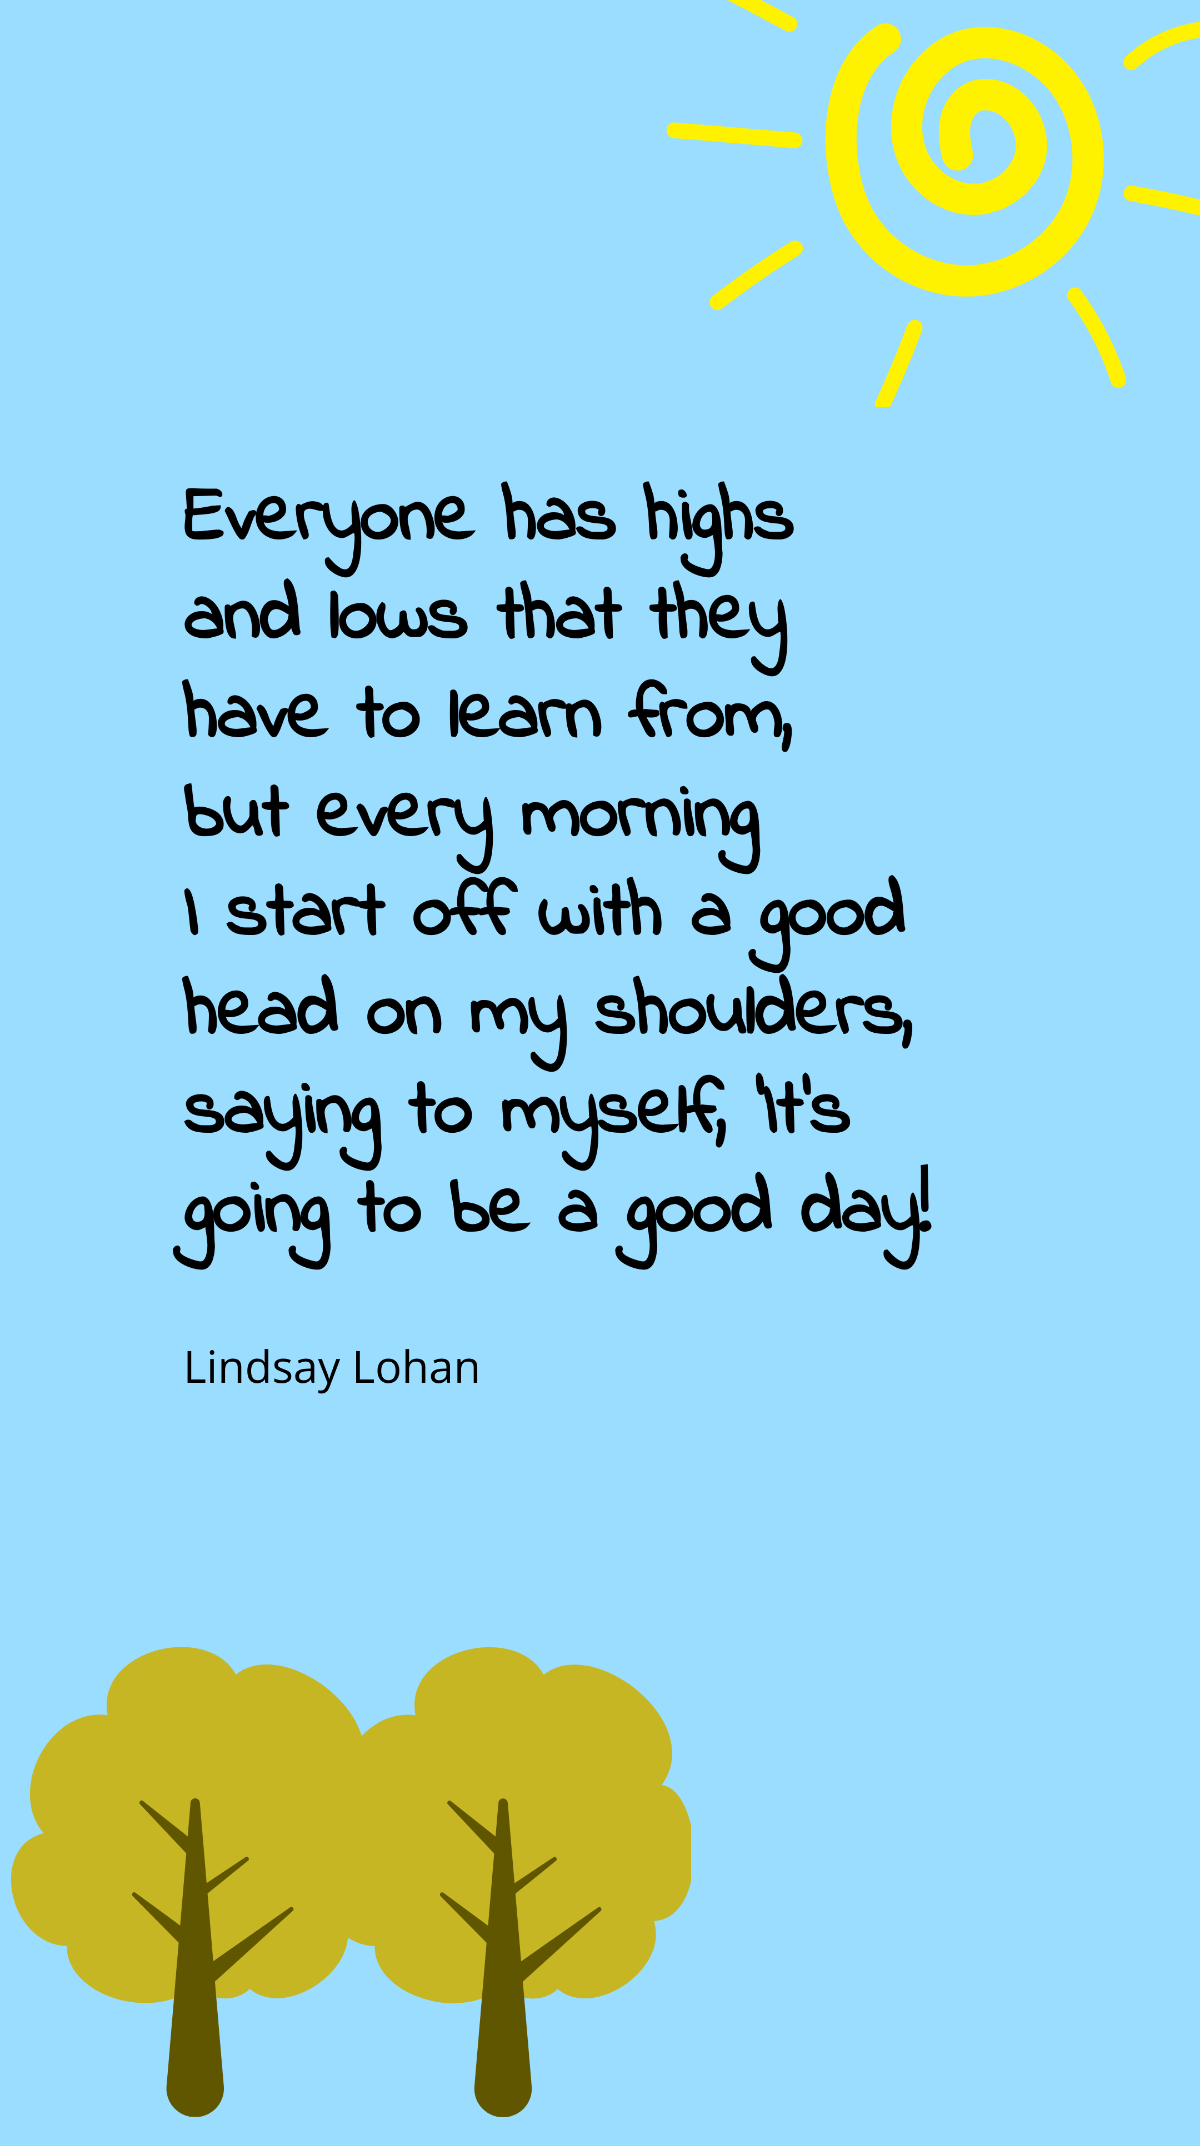 Lindsay Lohan - Everyone has highs and lows that they have to learn from, but every morning I start off with a good head on my shoulders, saying to myself, ‘It’s going to be a good day! Template